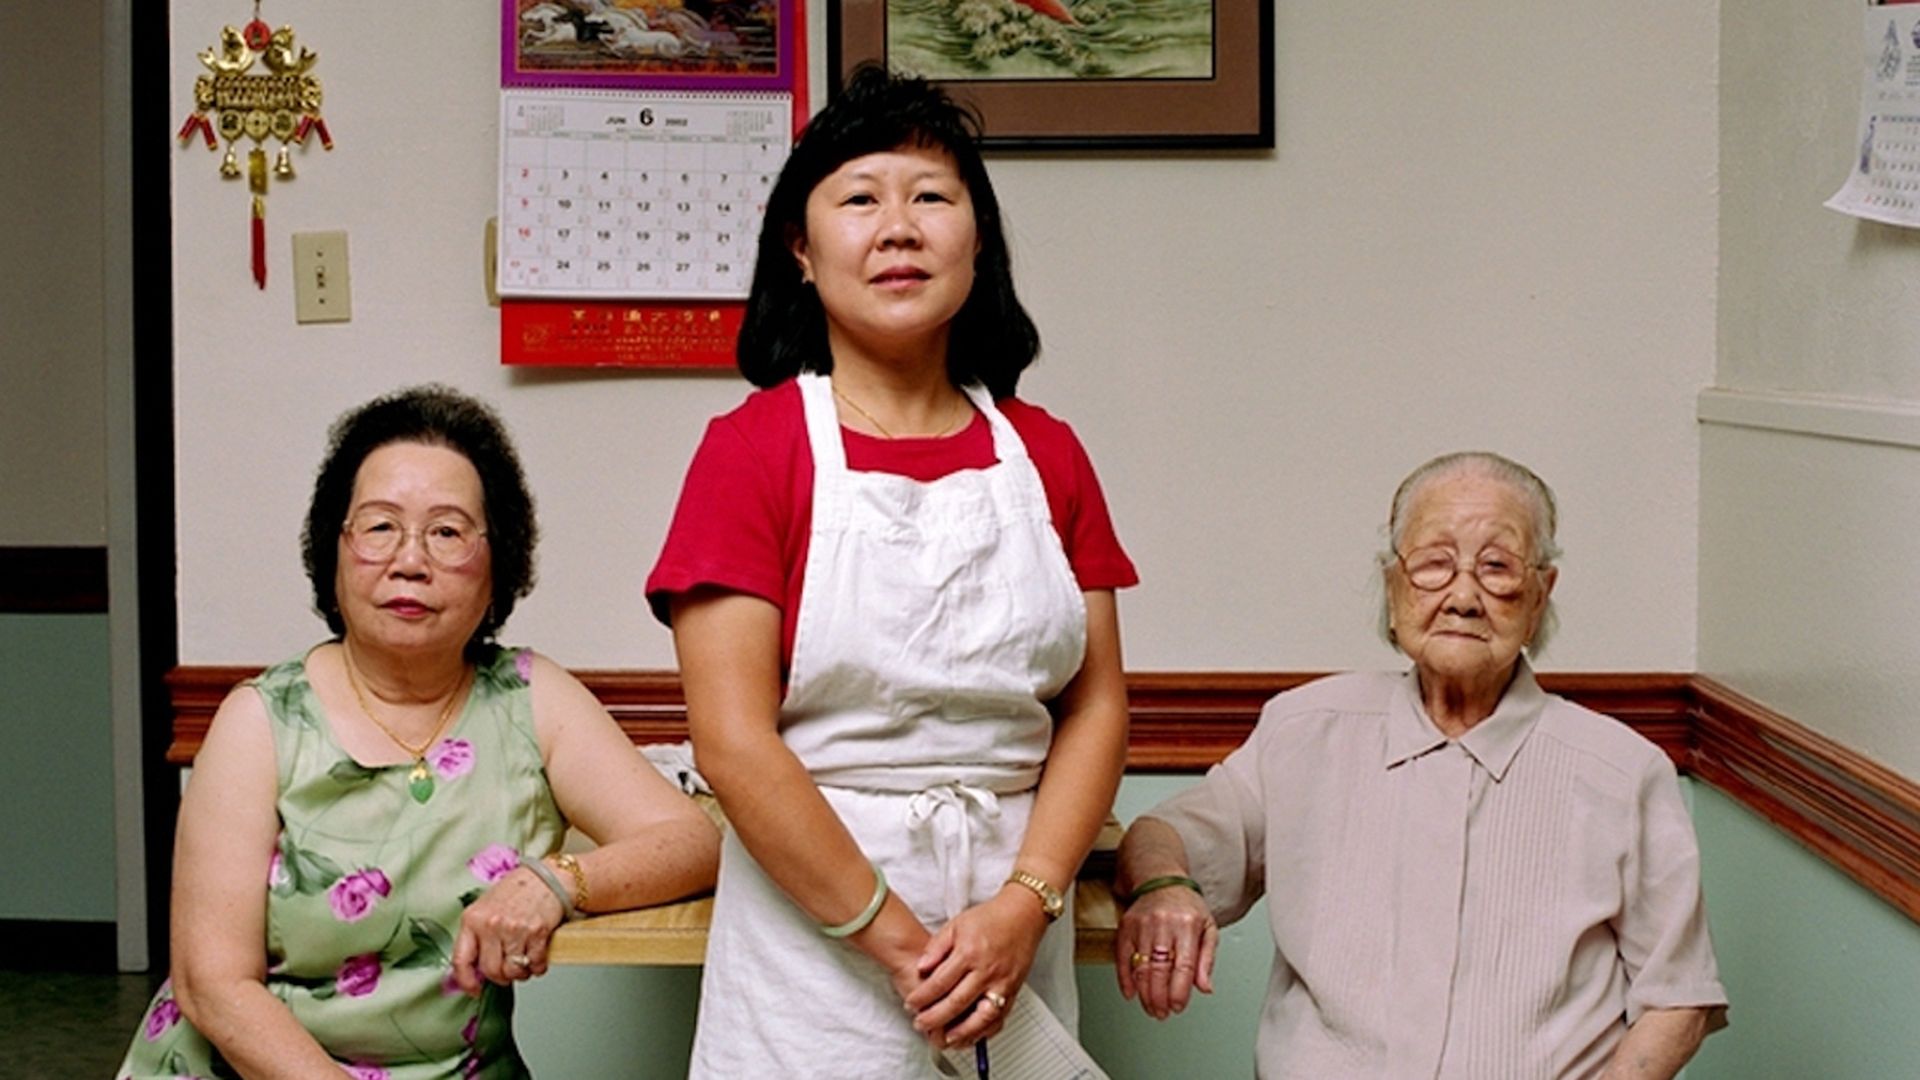 An image of three generations of women, one of which is wearing an apron.